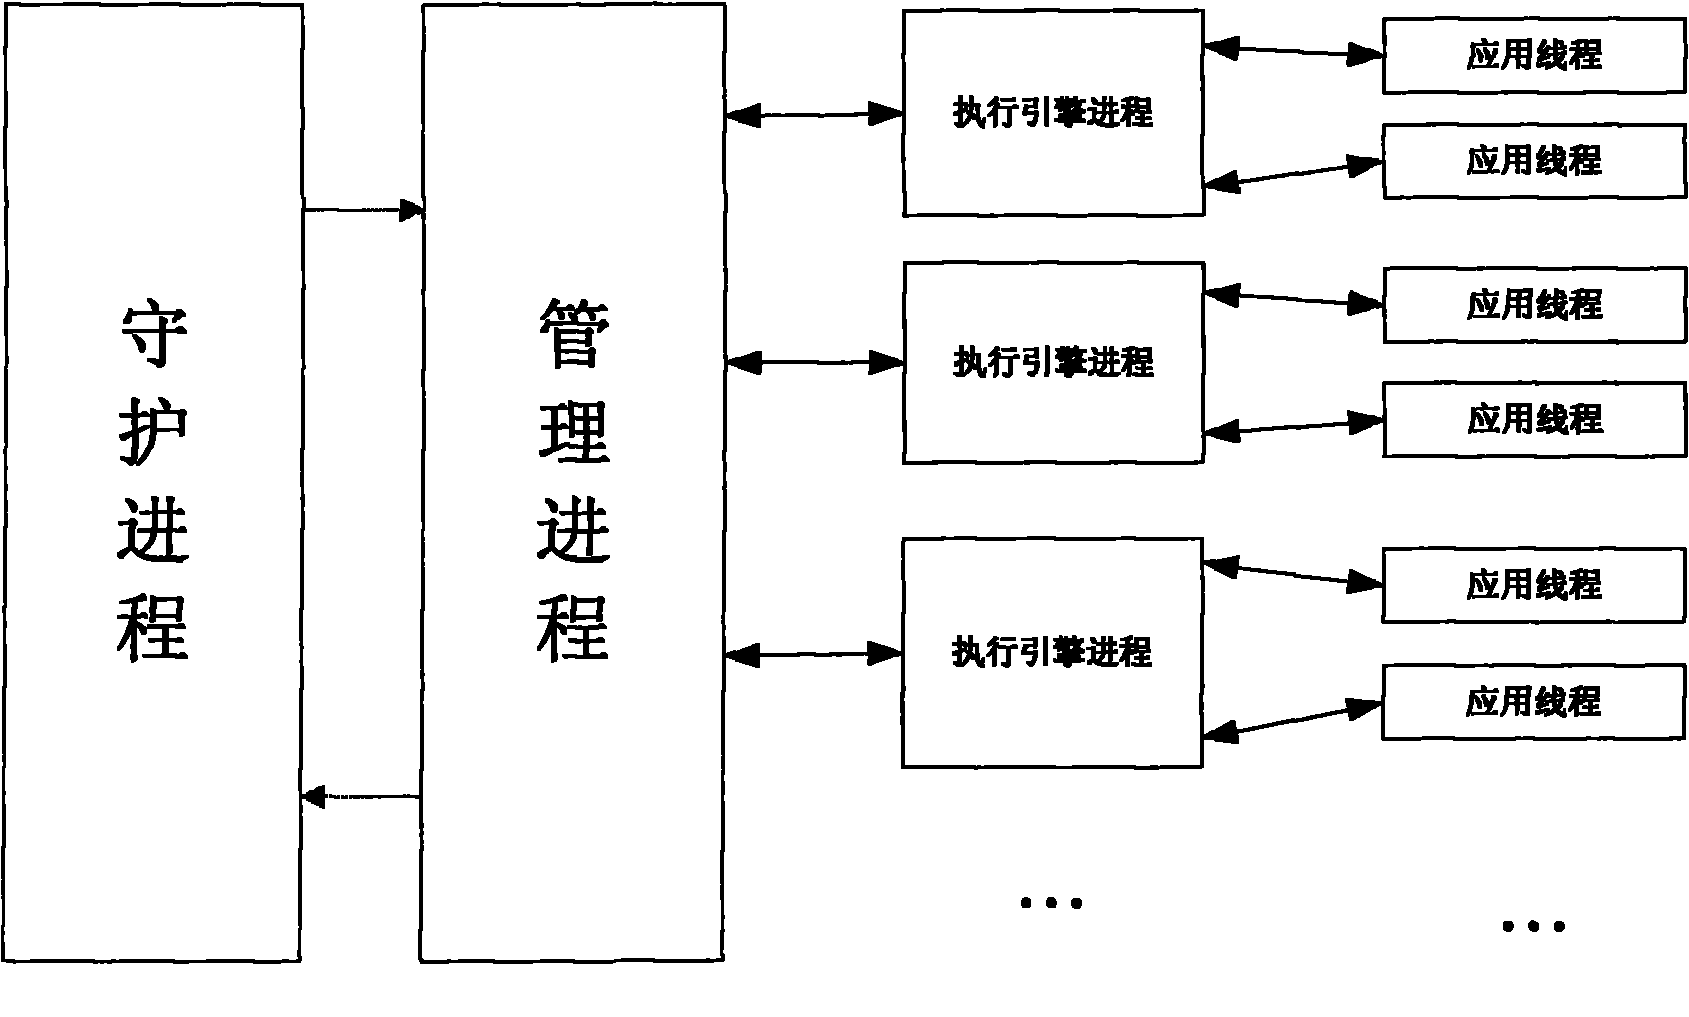 Embedded system supporting dynamic loading operation of application programs